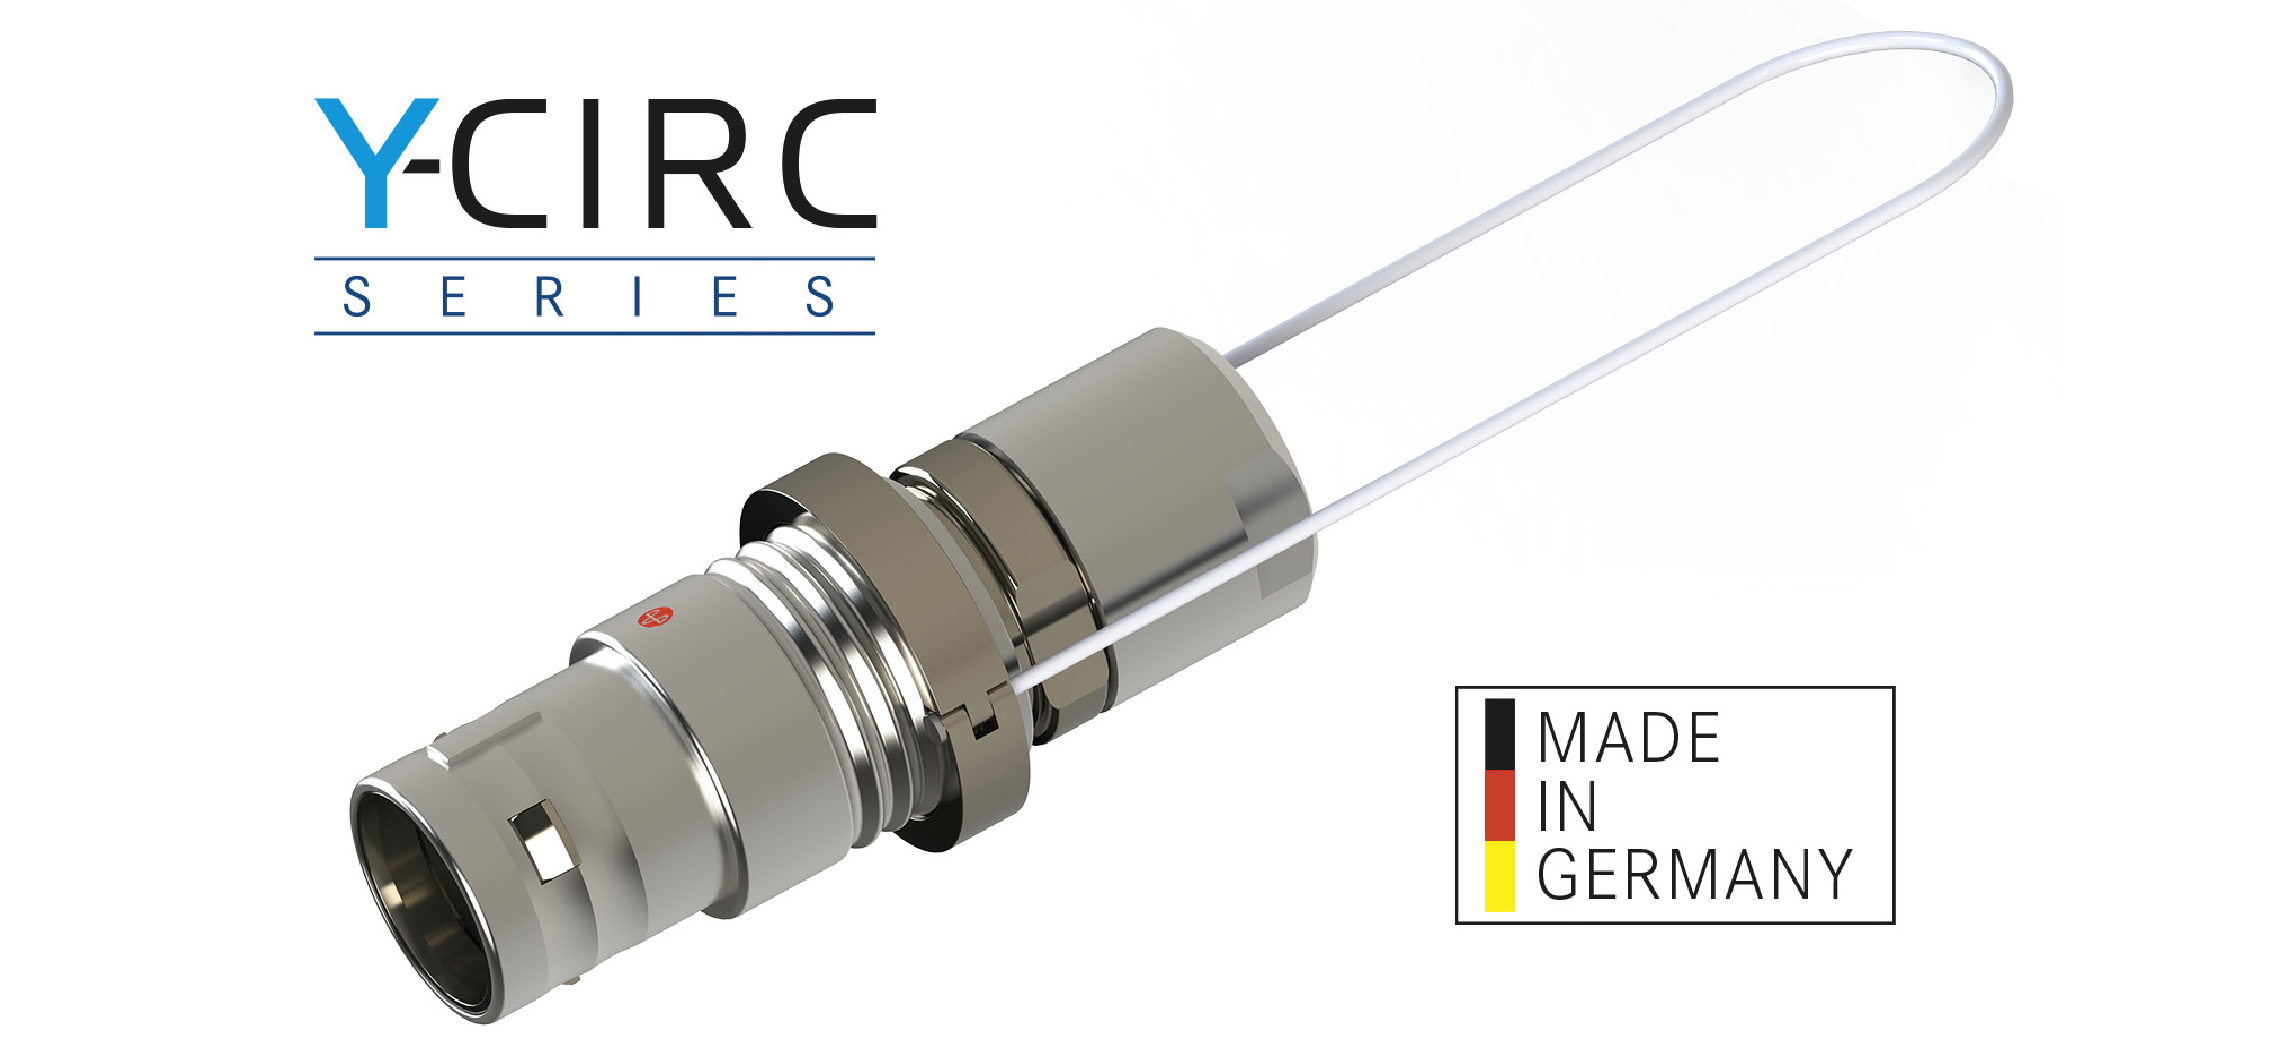 New efficient release system for Push-Pull circular connectors of the Y-Circ P series